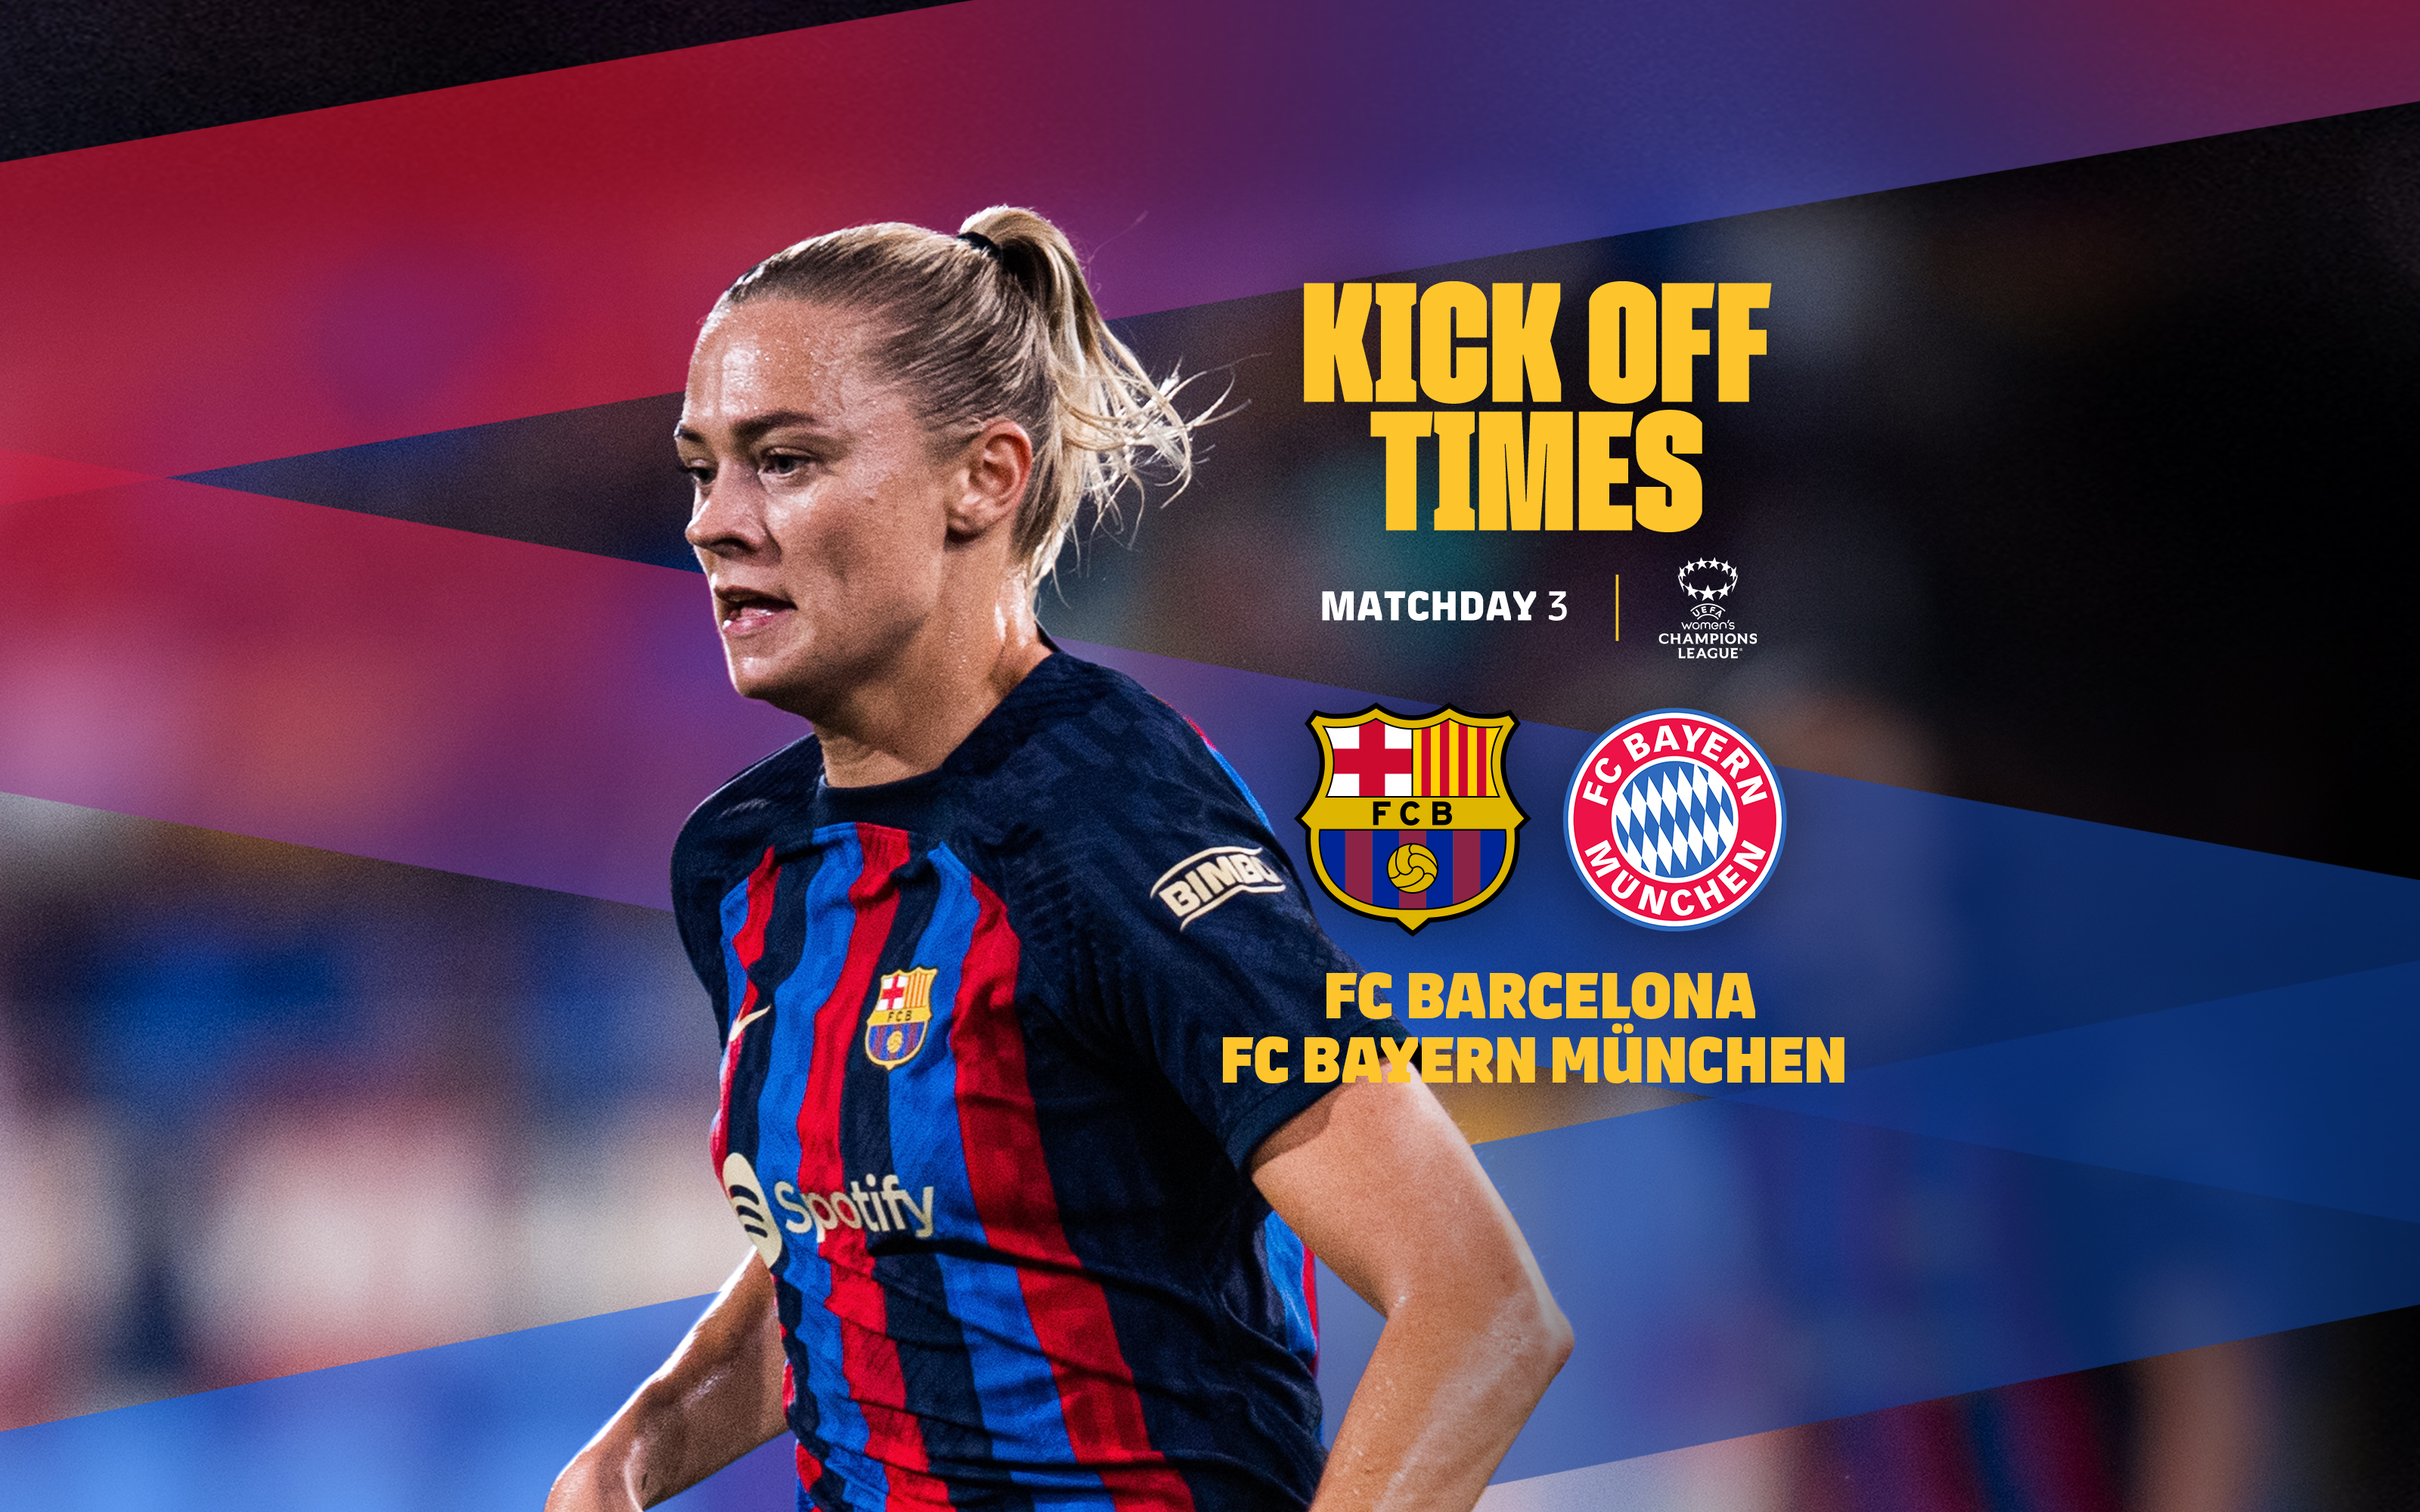 teller beoefenaar Andes When and where to watch FC Barcelona v Bayern Munich